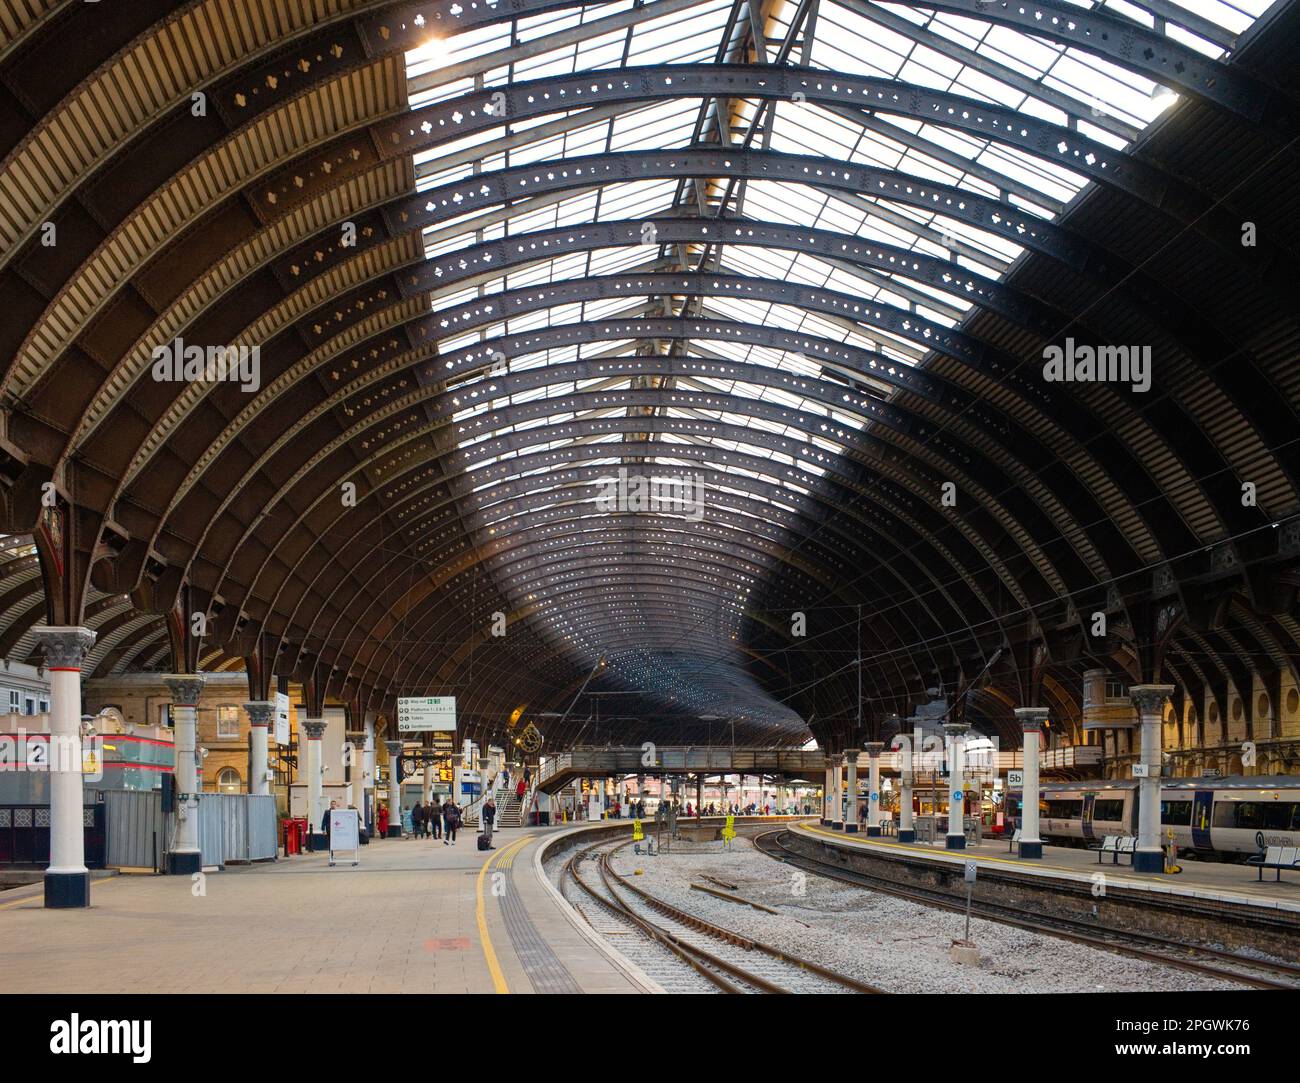 York railway station and glass canopy Stock Photo